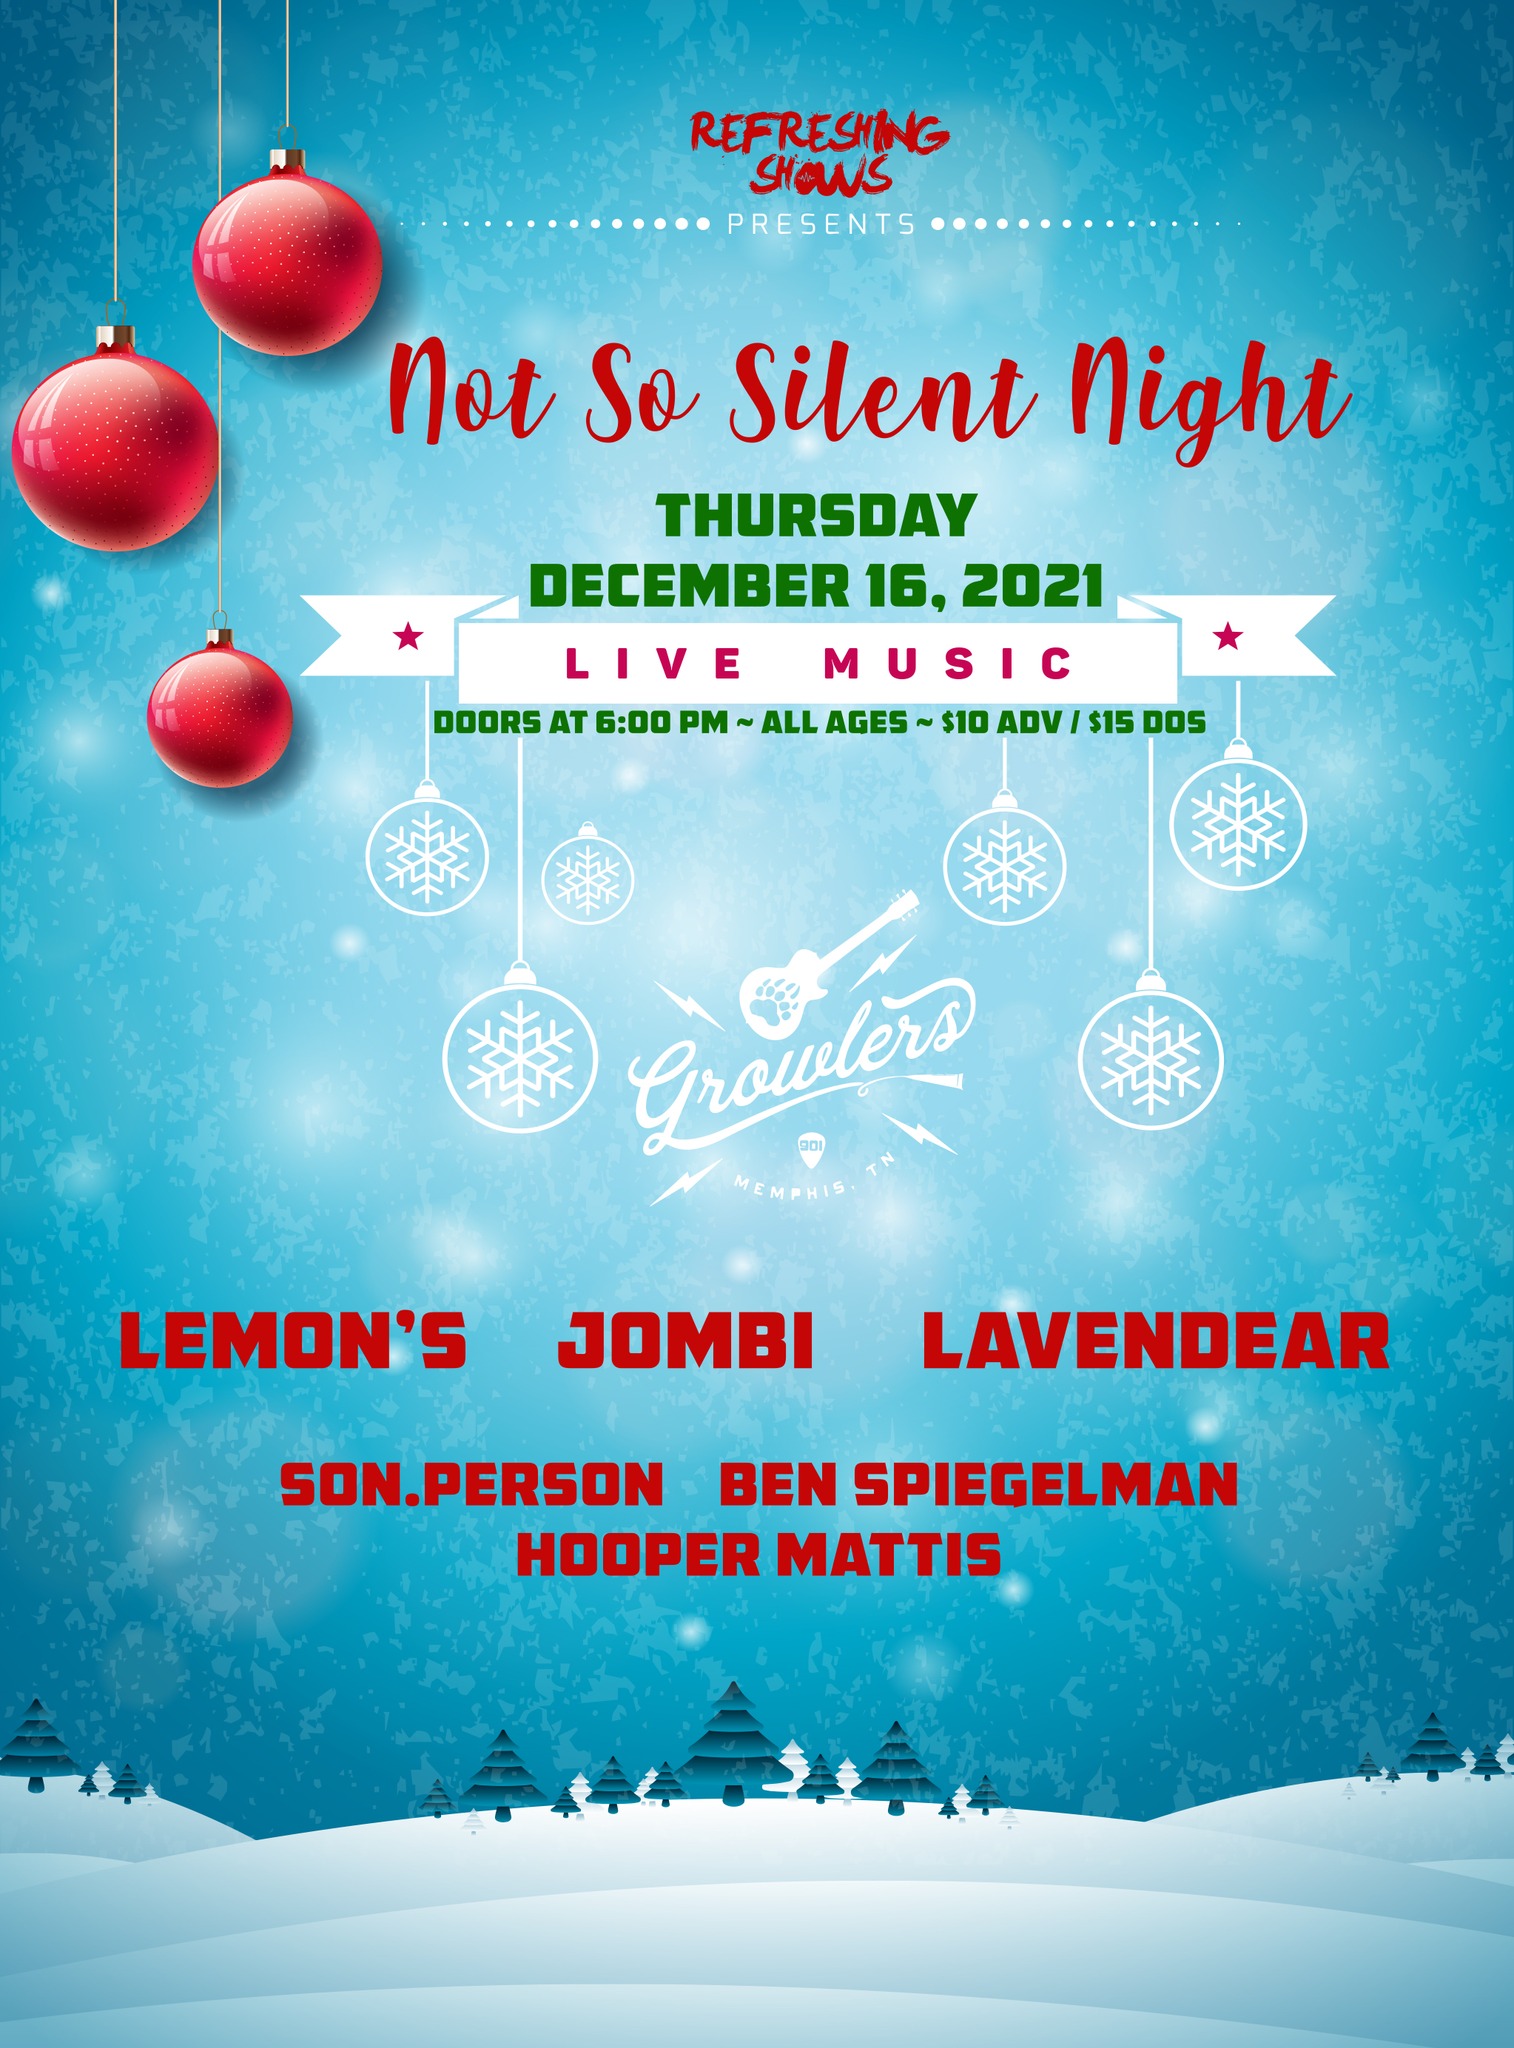 Buy Tickets to Not So Silent Night in Memphis on Dec 16, 2021